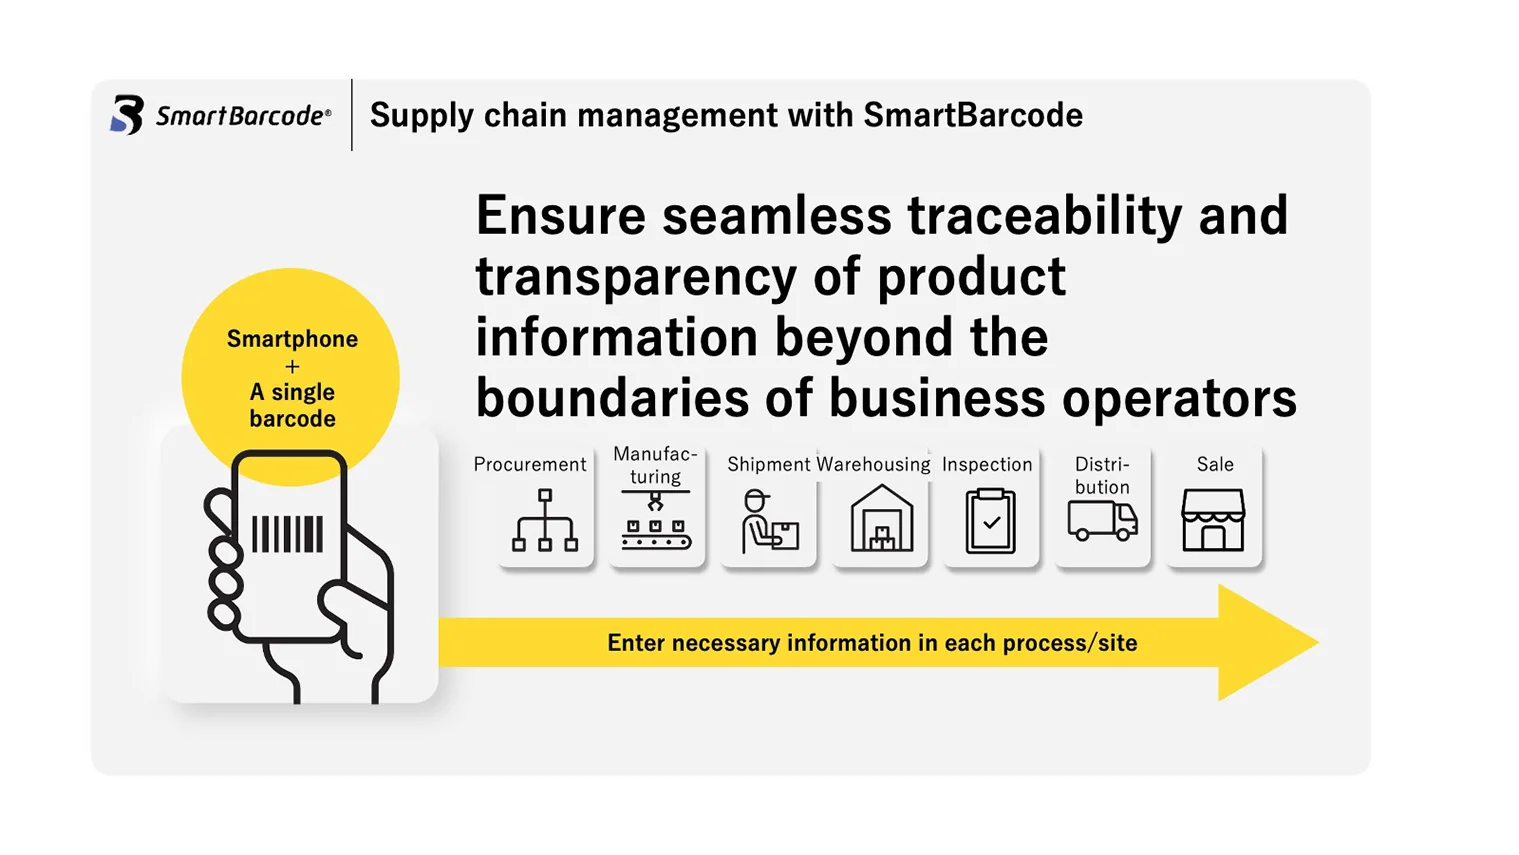 Supply chain management with SmartBarcode. Ensure seamless traceability and transparency of product information beyond the boundaries of business operators.